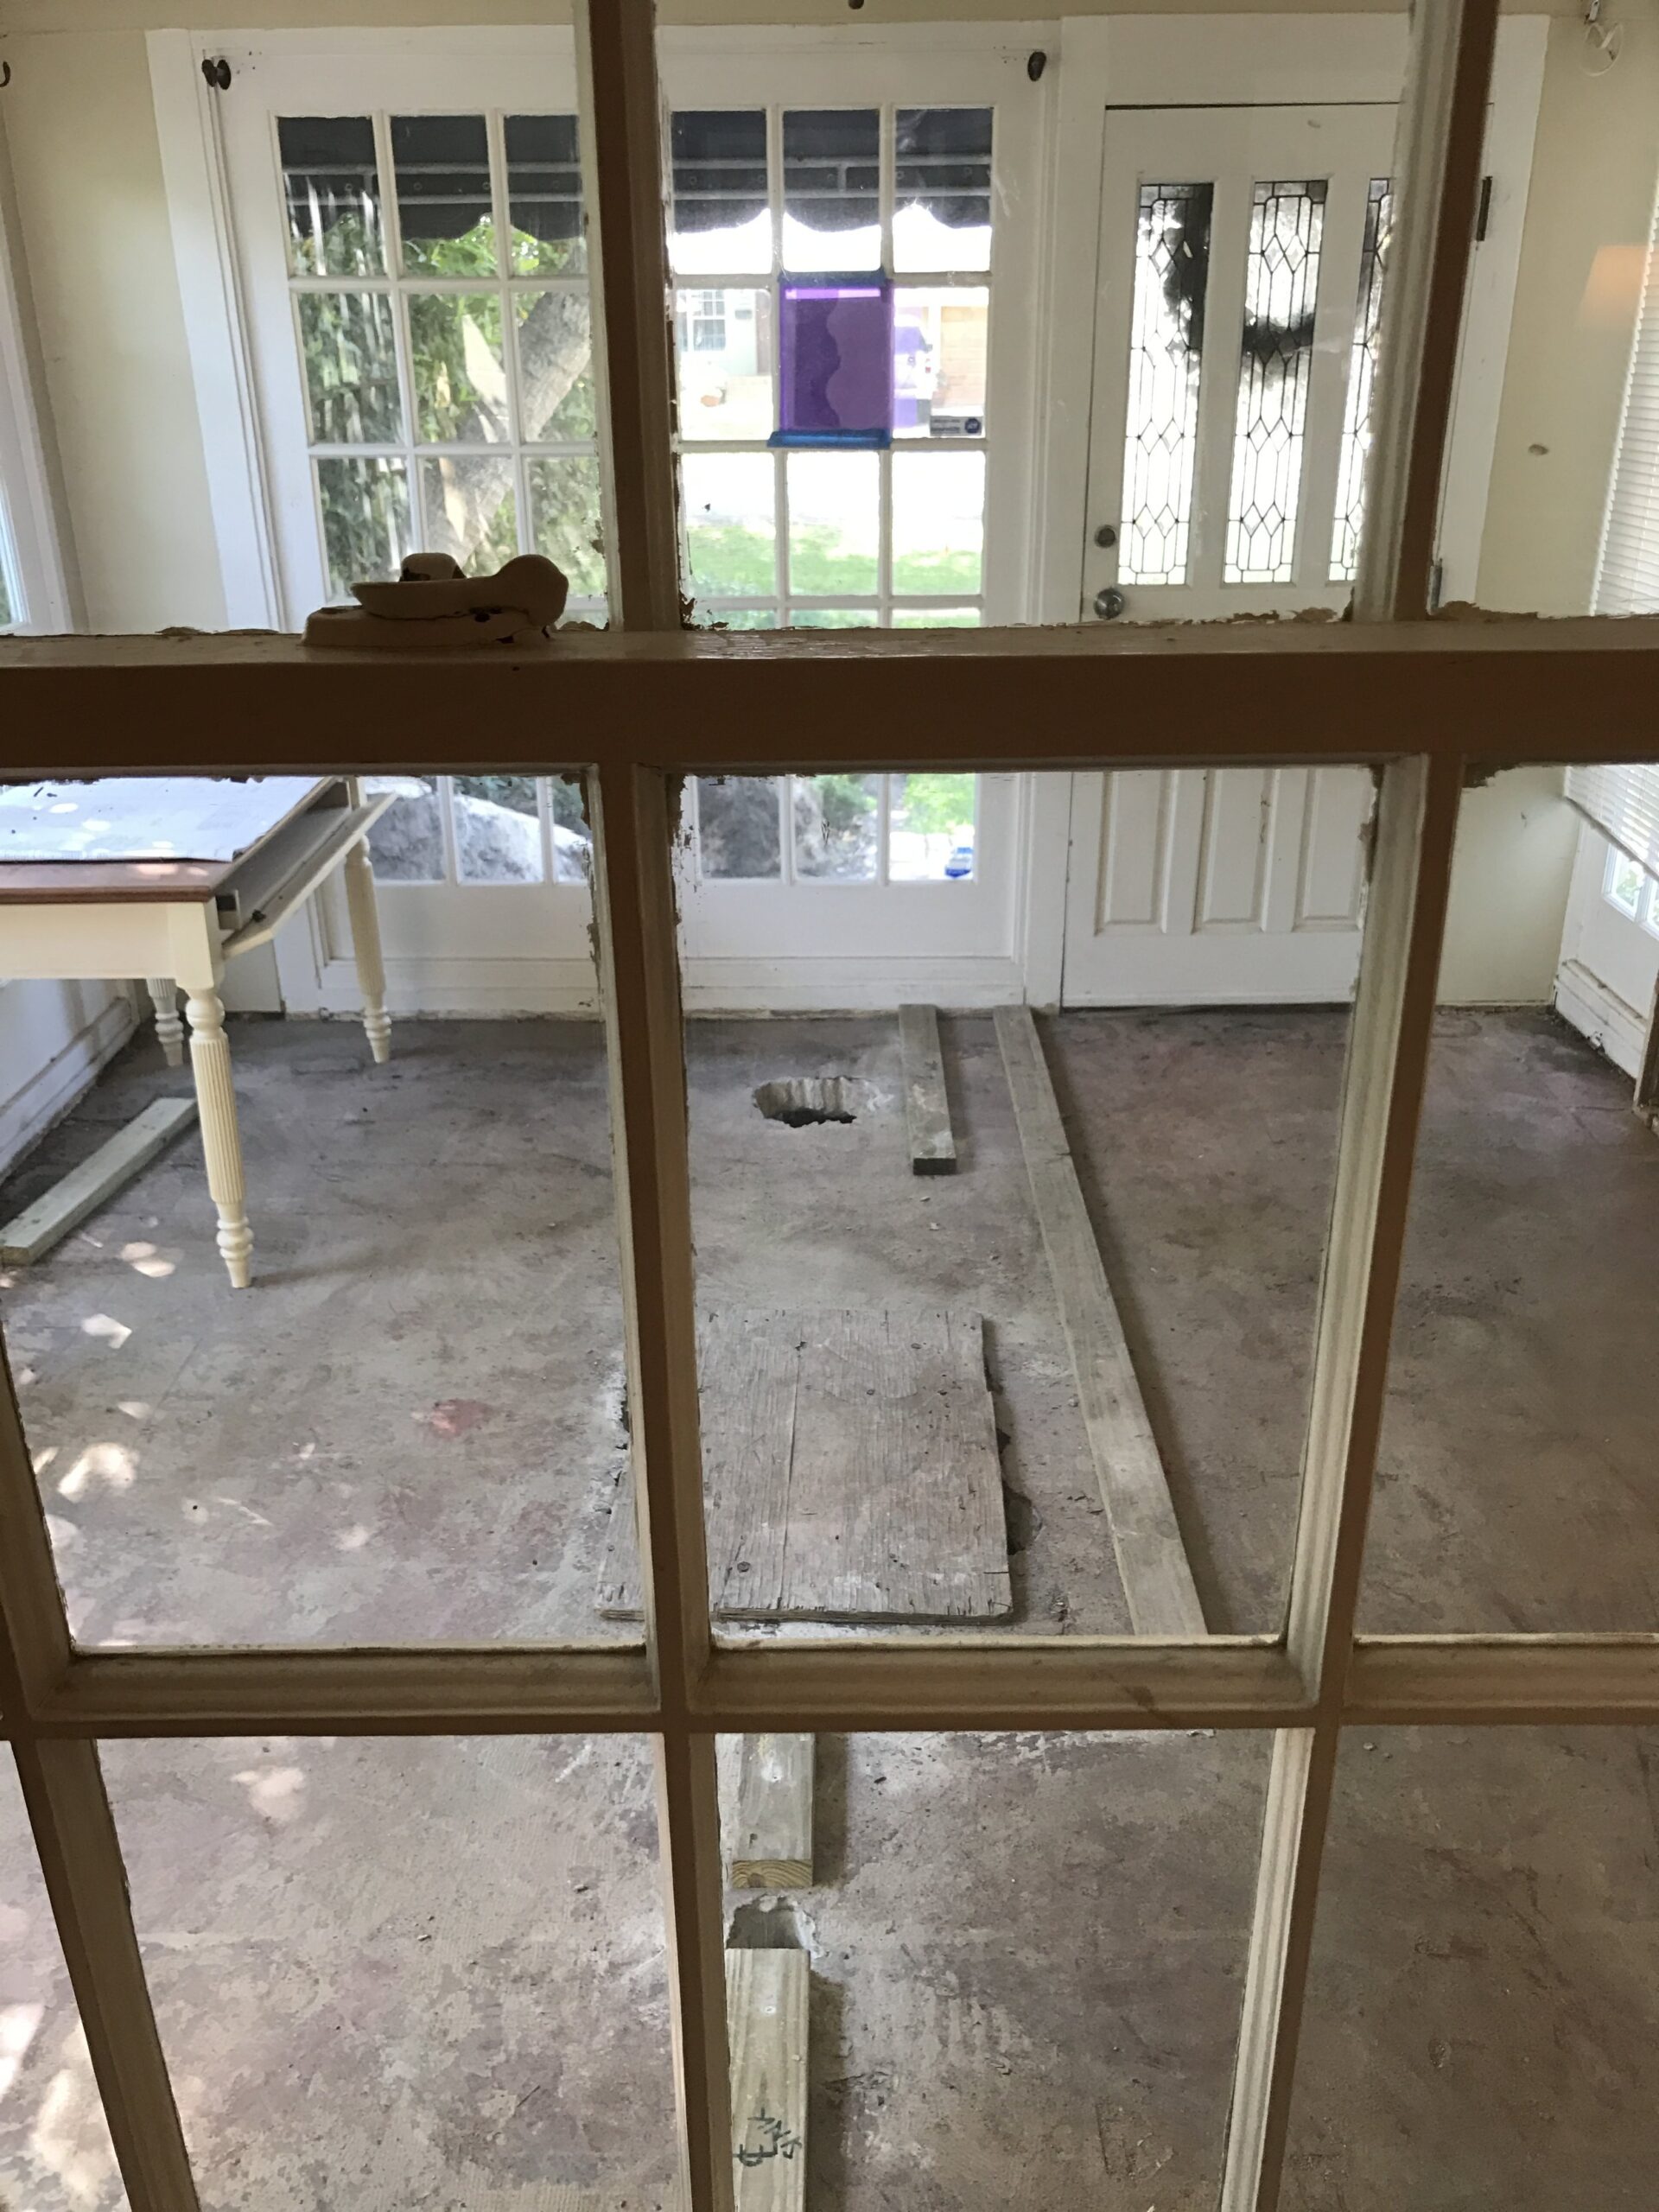 This is the sunroom space that we tuned into the master bathroom, master closet and entry way to the house. &nbsp;The wood planks on the floor are the outline of the master bath for reference,,,